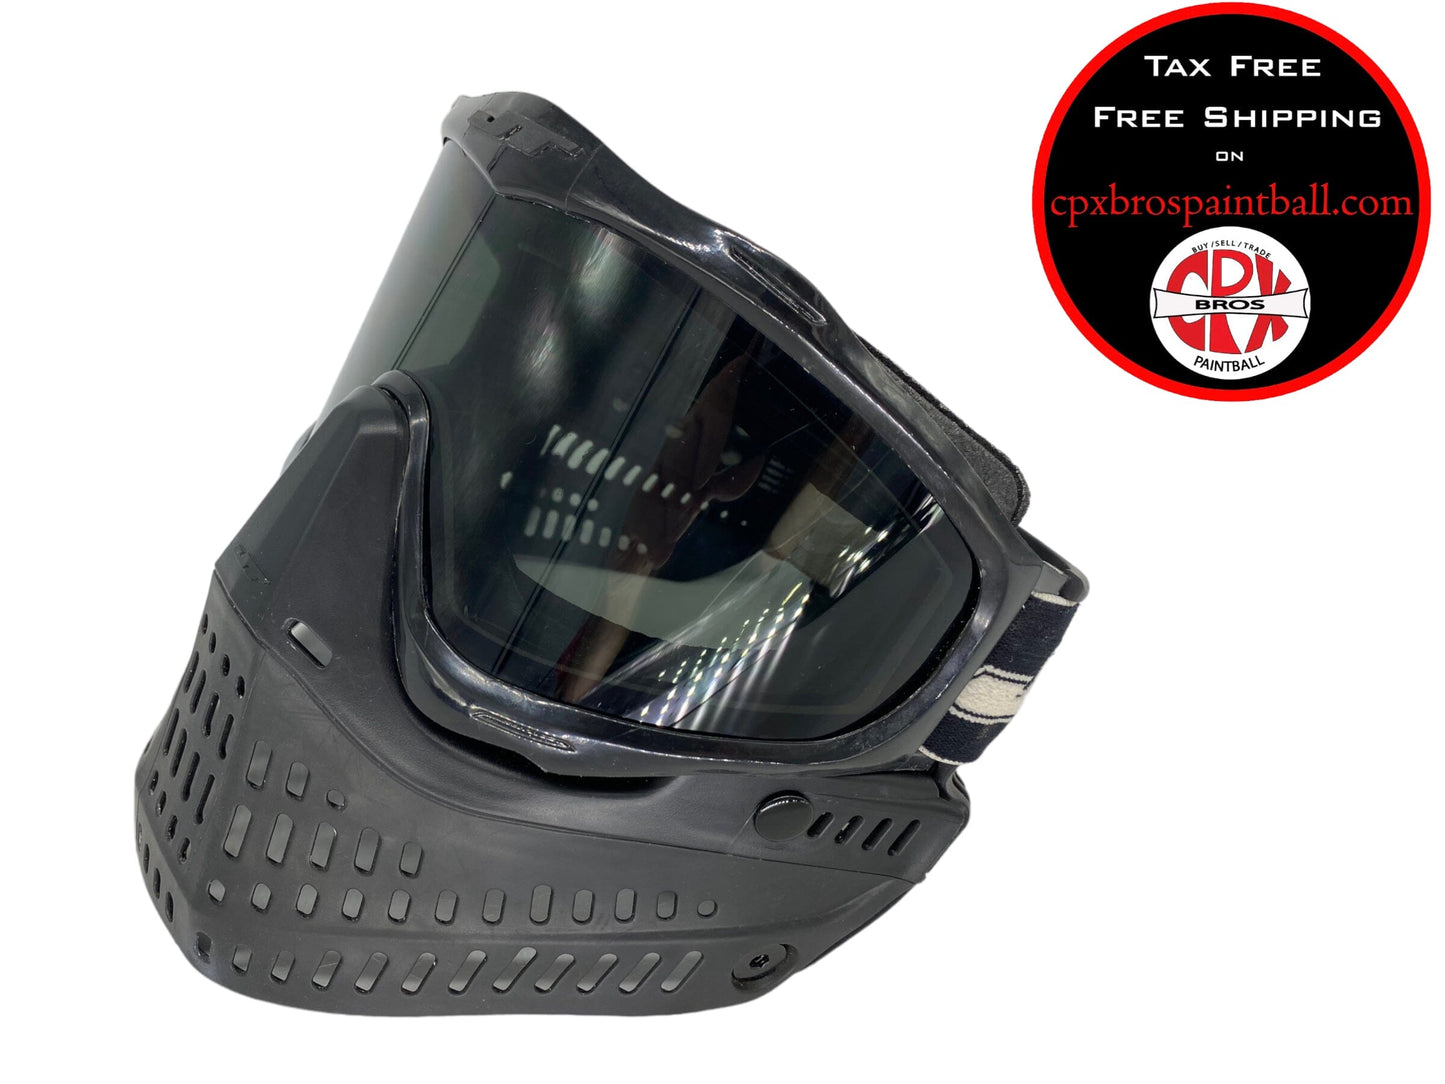 Used Jt Pro-flex Mask Goggle Paintball Gun from CPXBrosPaintball Buy/Sell/Trade Paintball Markers, Paintball Hoppers, Paintball Masks, and Hormesis Headbands